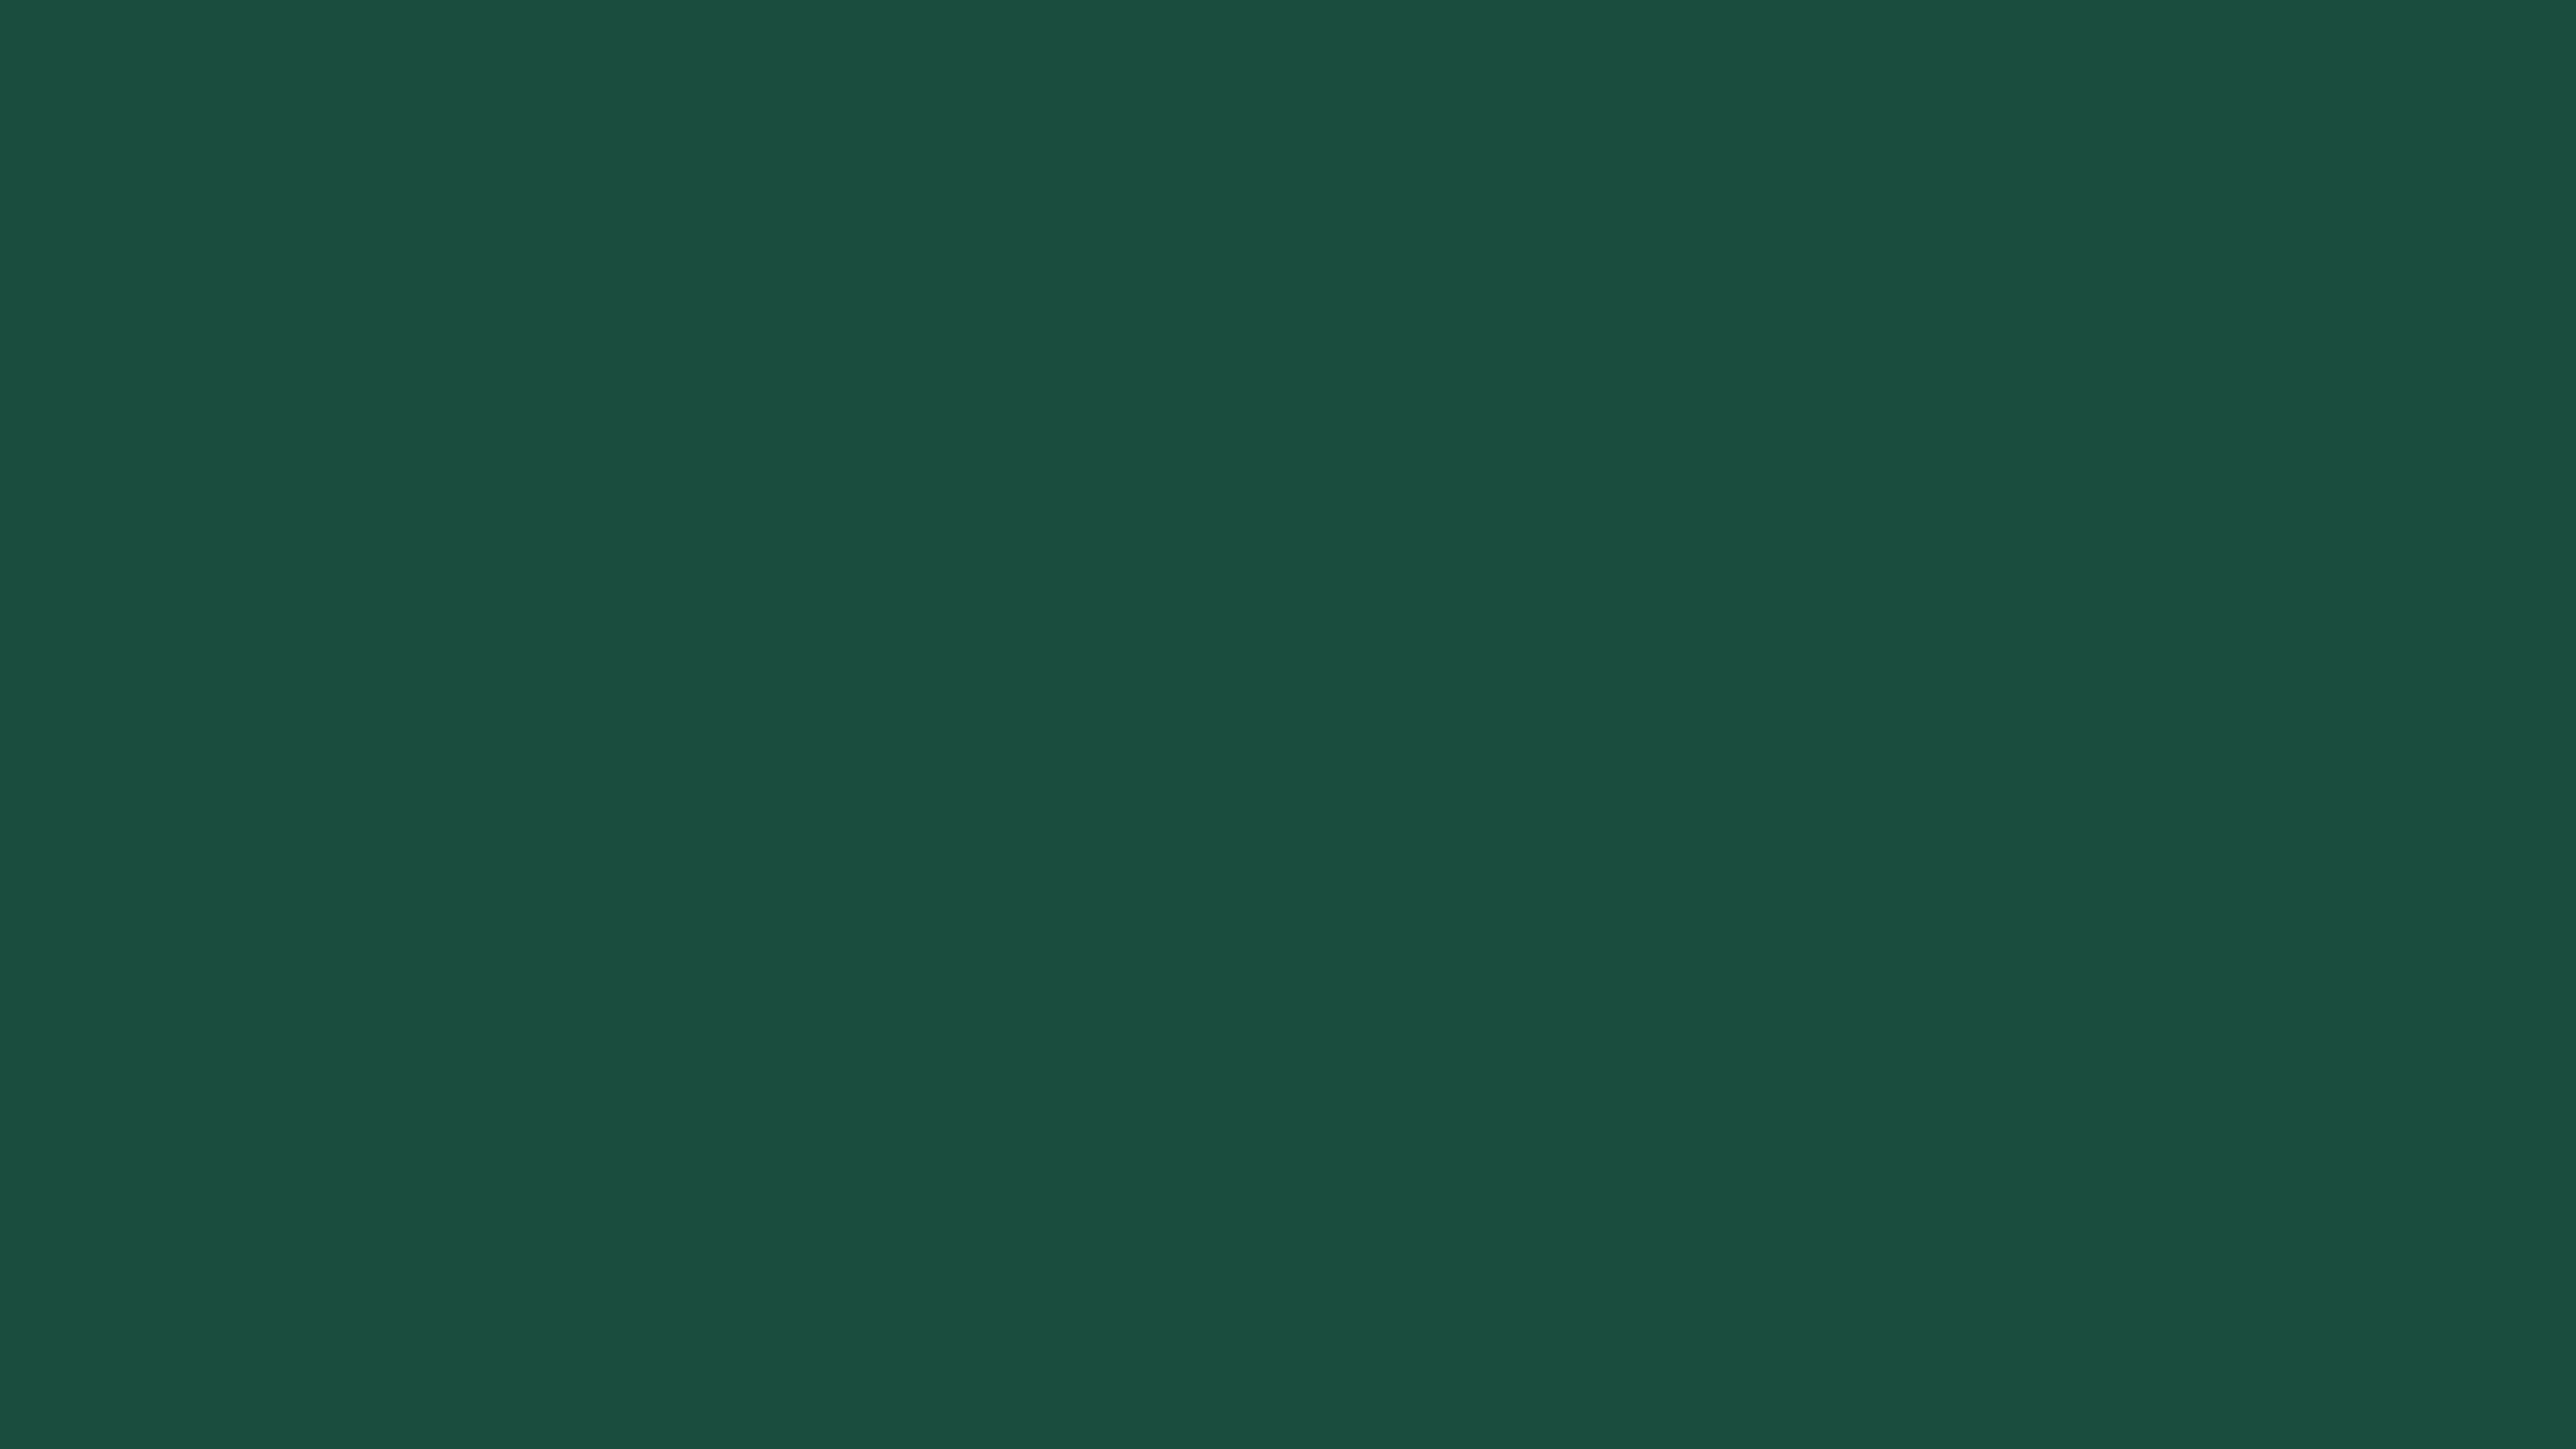 7680x4320 English Green Solid Color Background